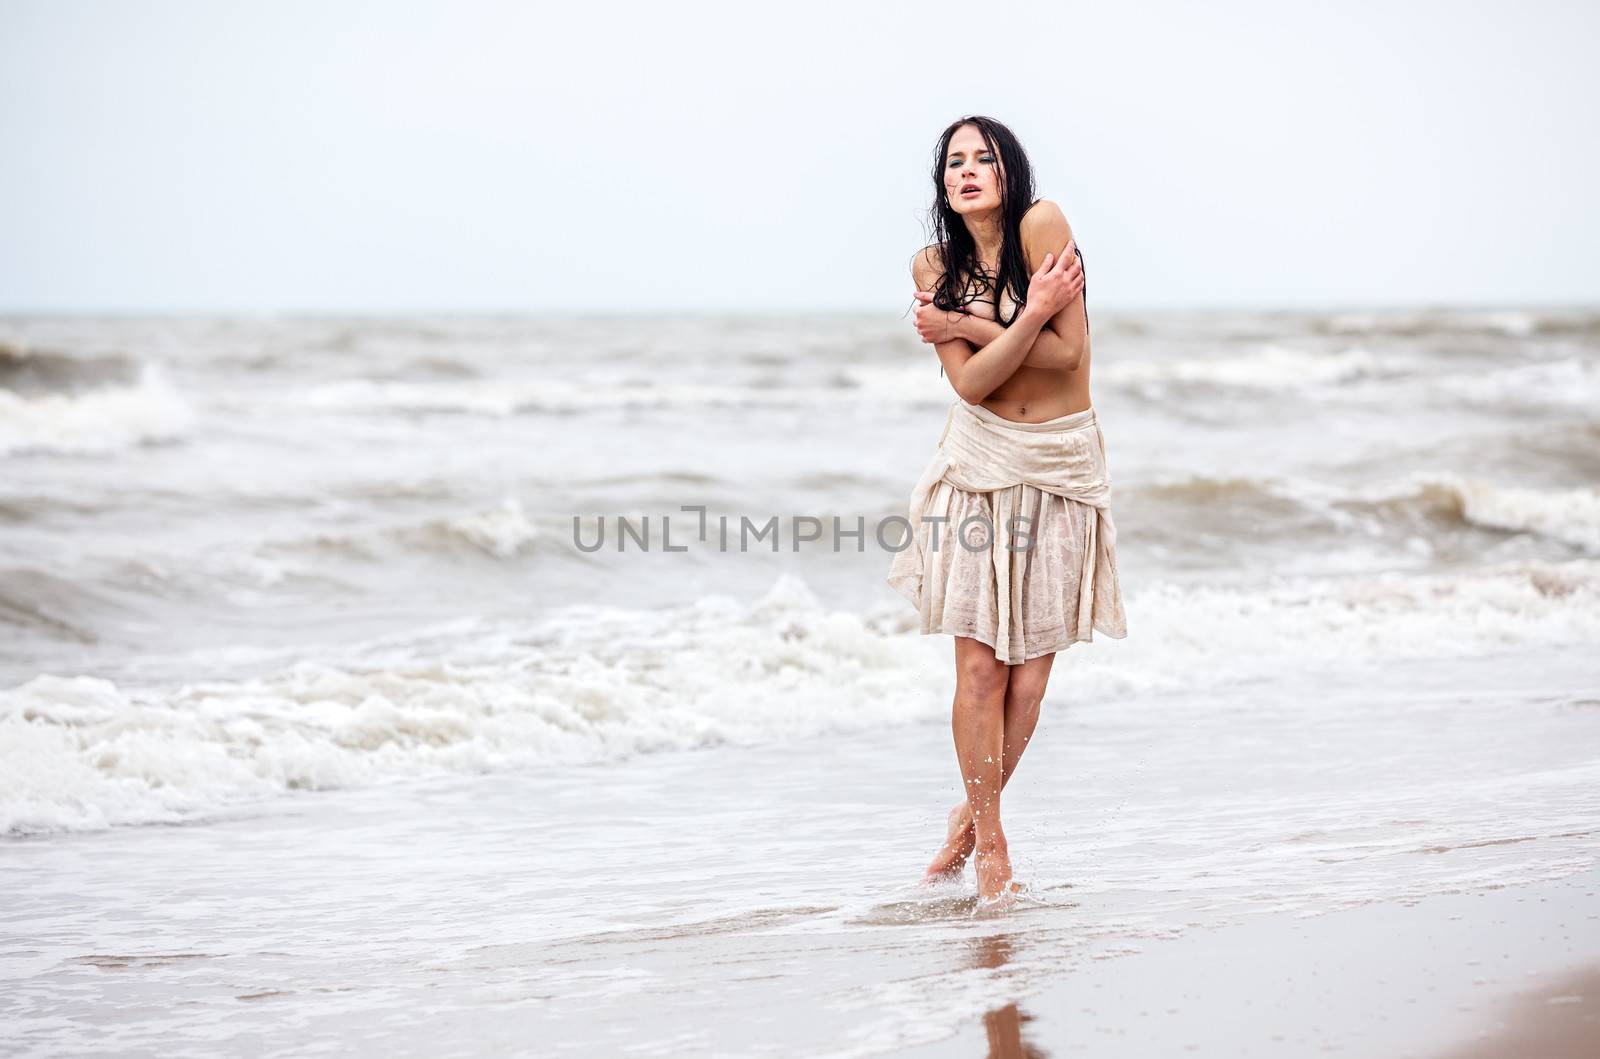 Beautiful young seminude woman in the cold sea waves